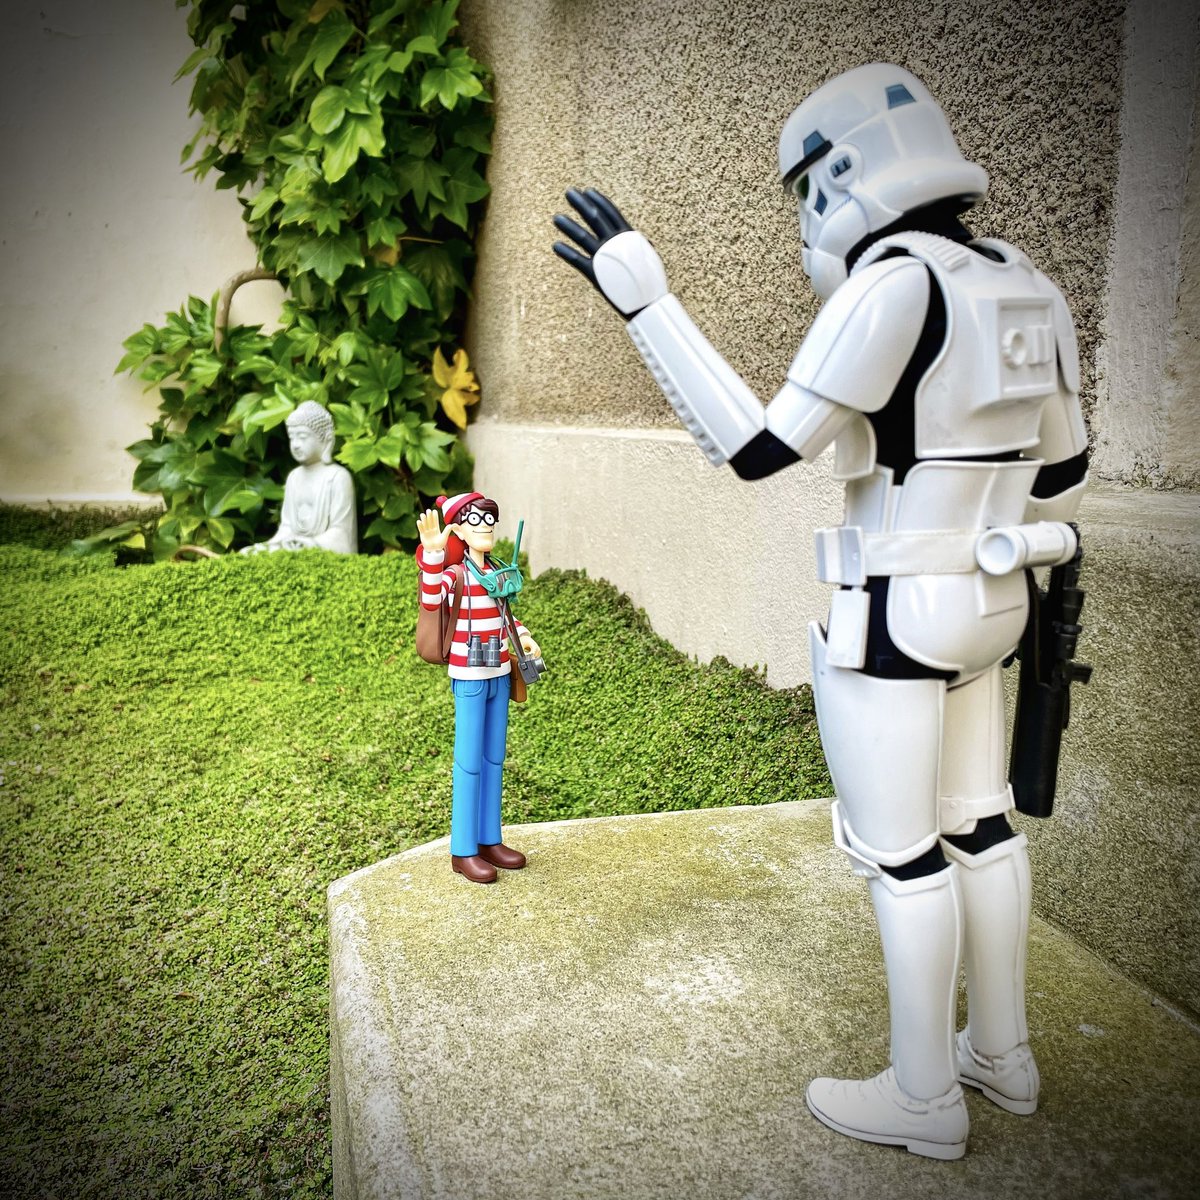 Wally,s go #whereswally #ouestcharlie #stormy #stormtrooper #starwars #Disney #hottoys #toystagram #toystory #toyphotography #actionfigures